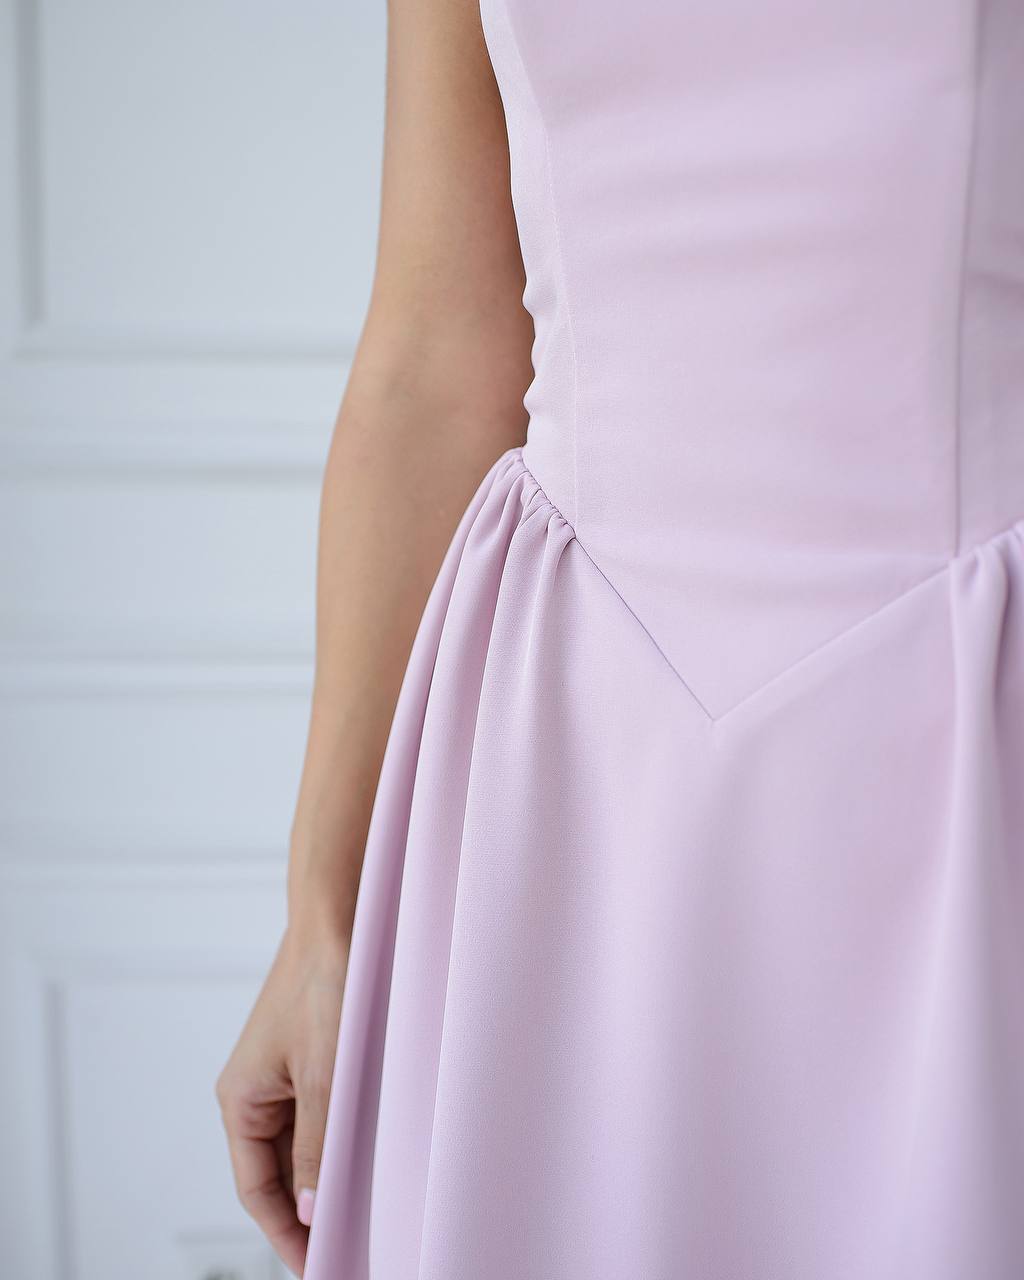 a close up of a person wearing a pink dress